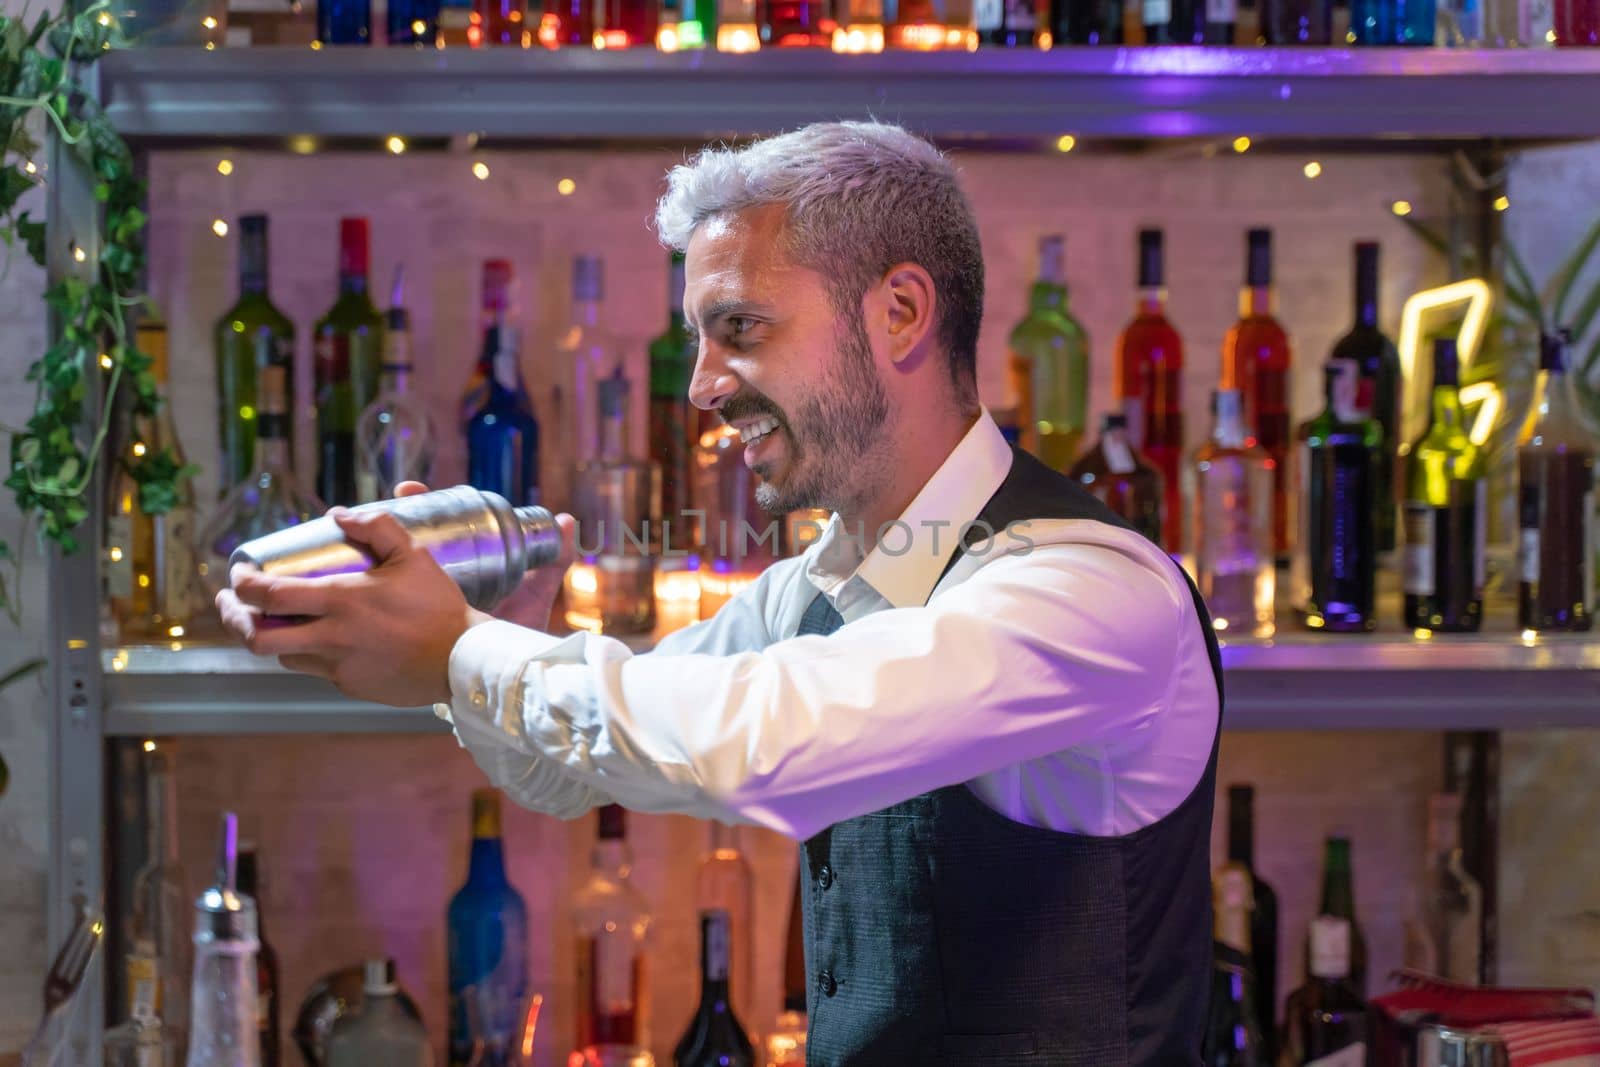 Professional bartender in a white shirt and black apron holds a steel shaker in his hands. Blurred bottles on shelves in background. High quality photo